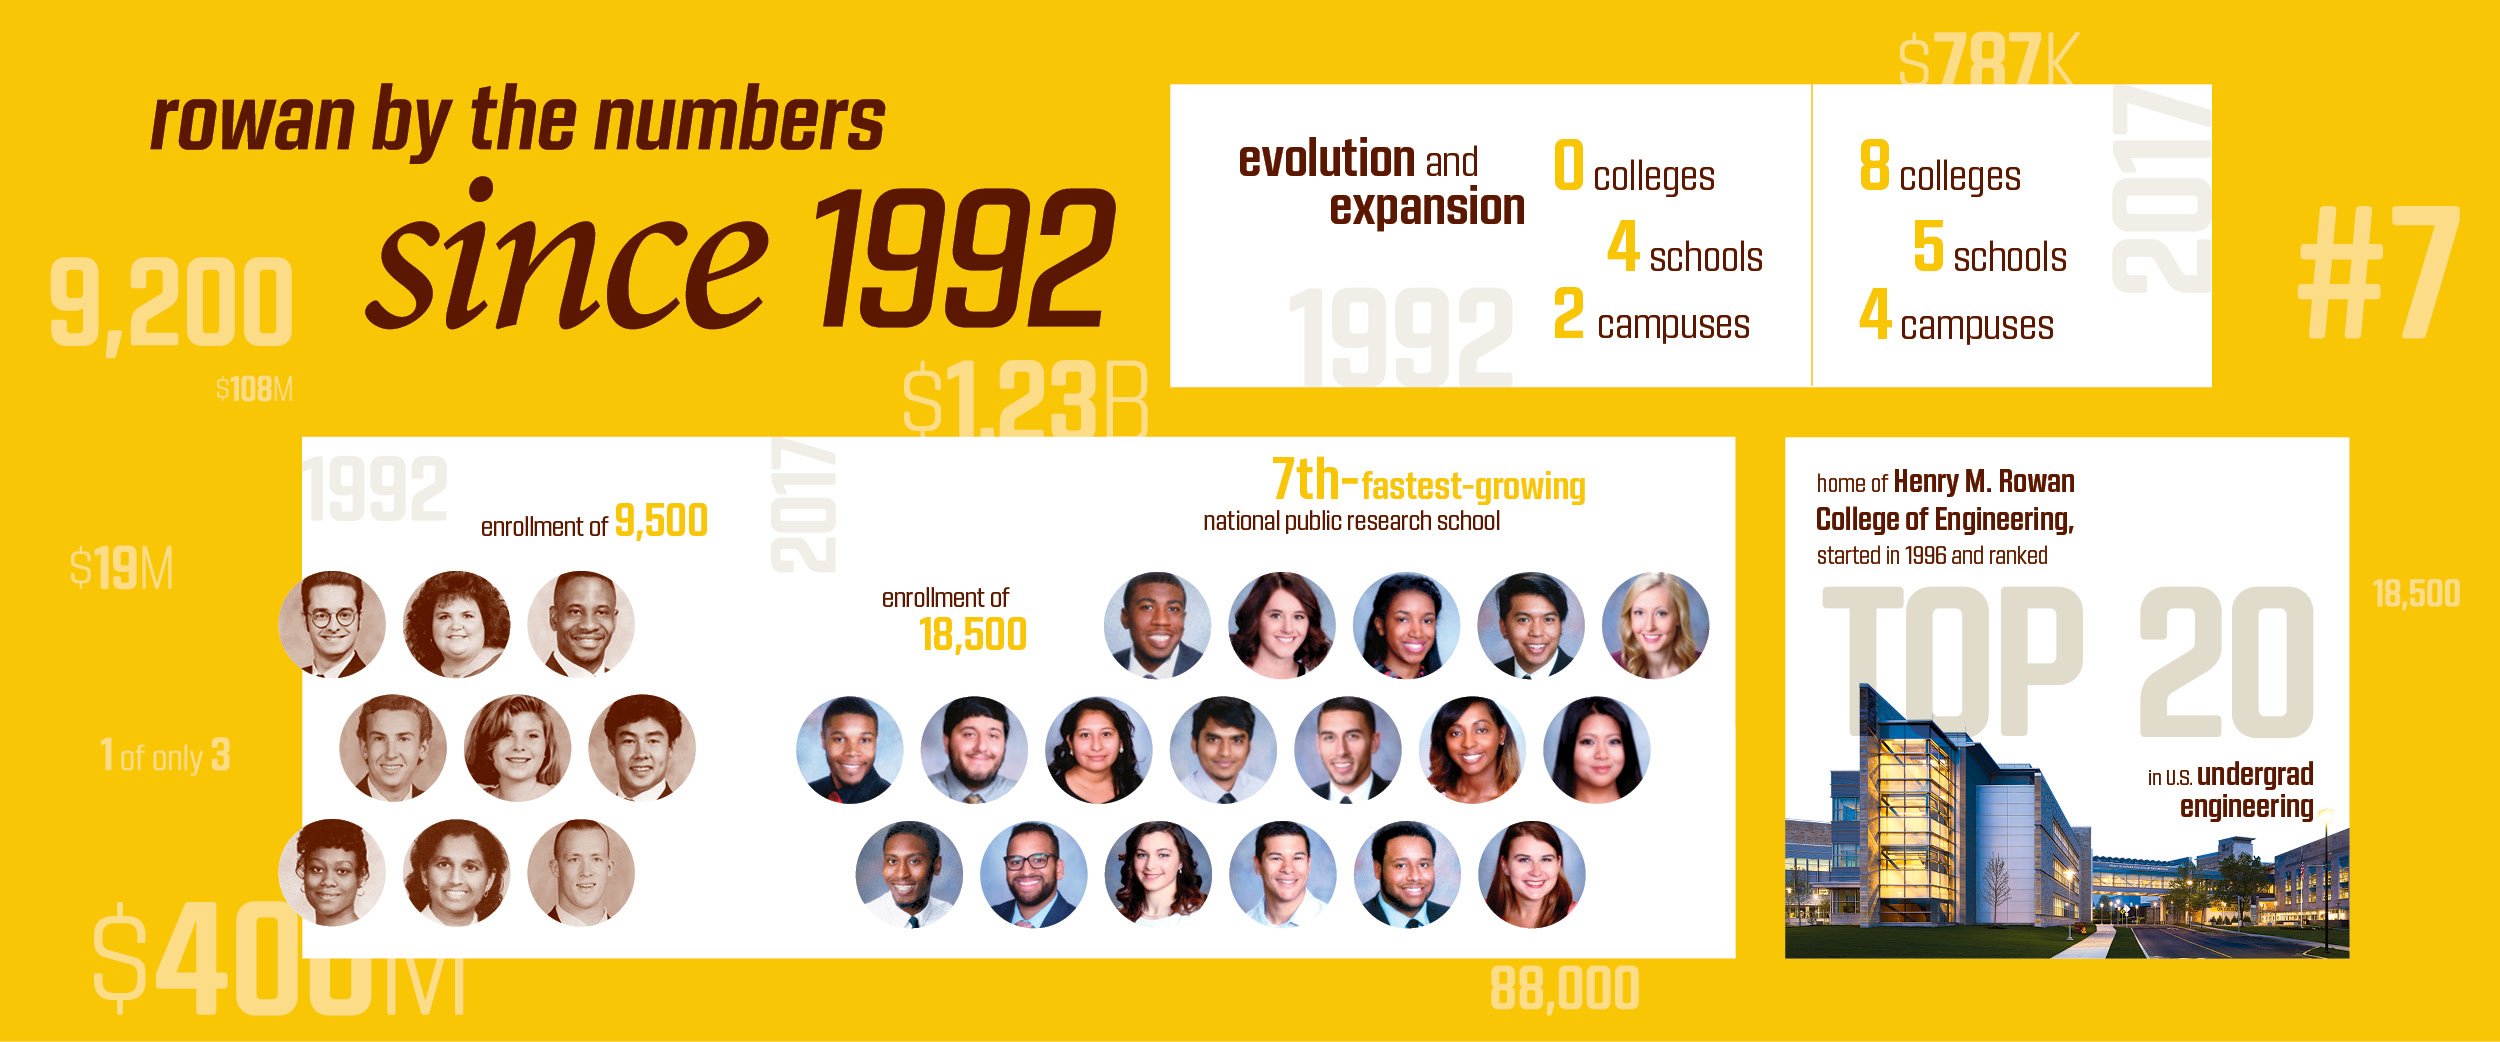 Rowan by the numbers since 1992